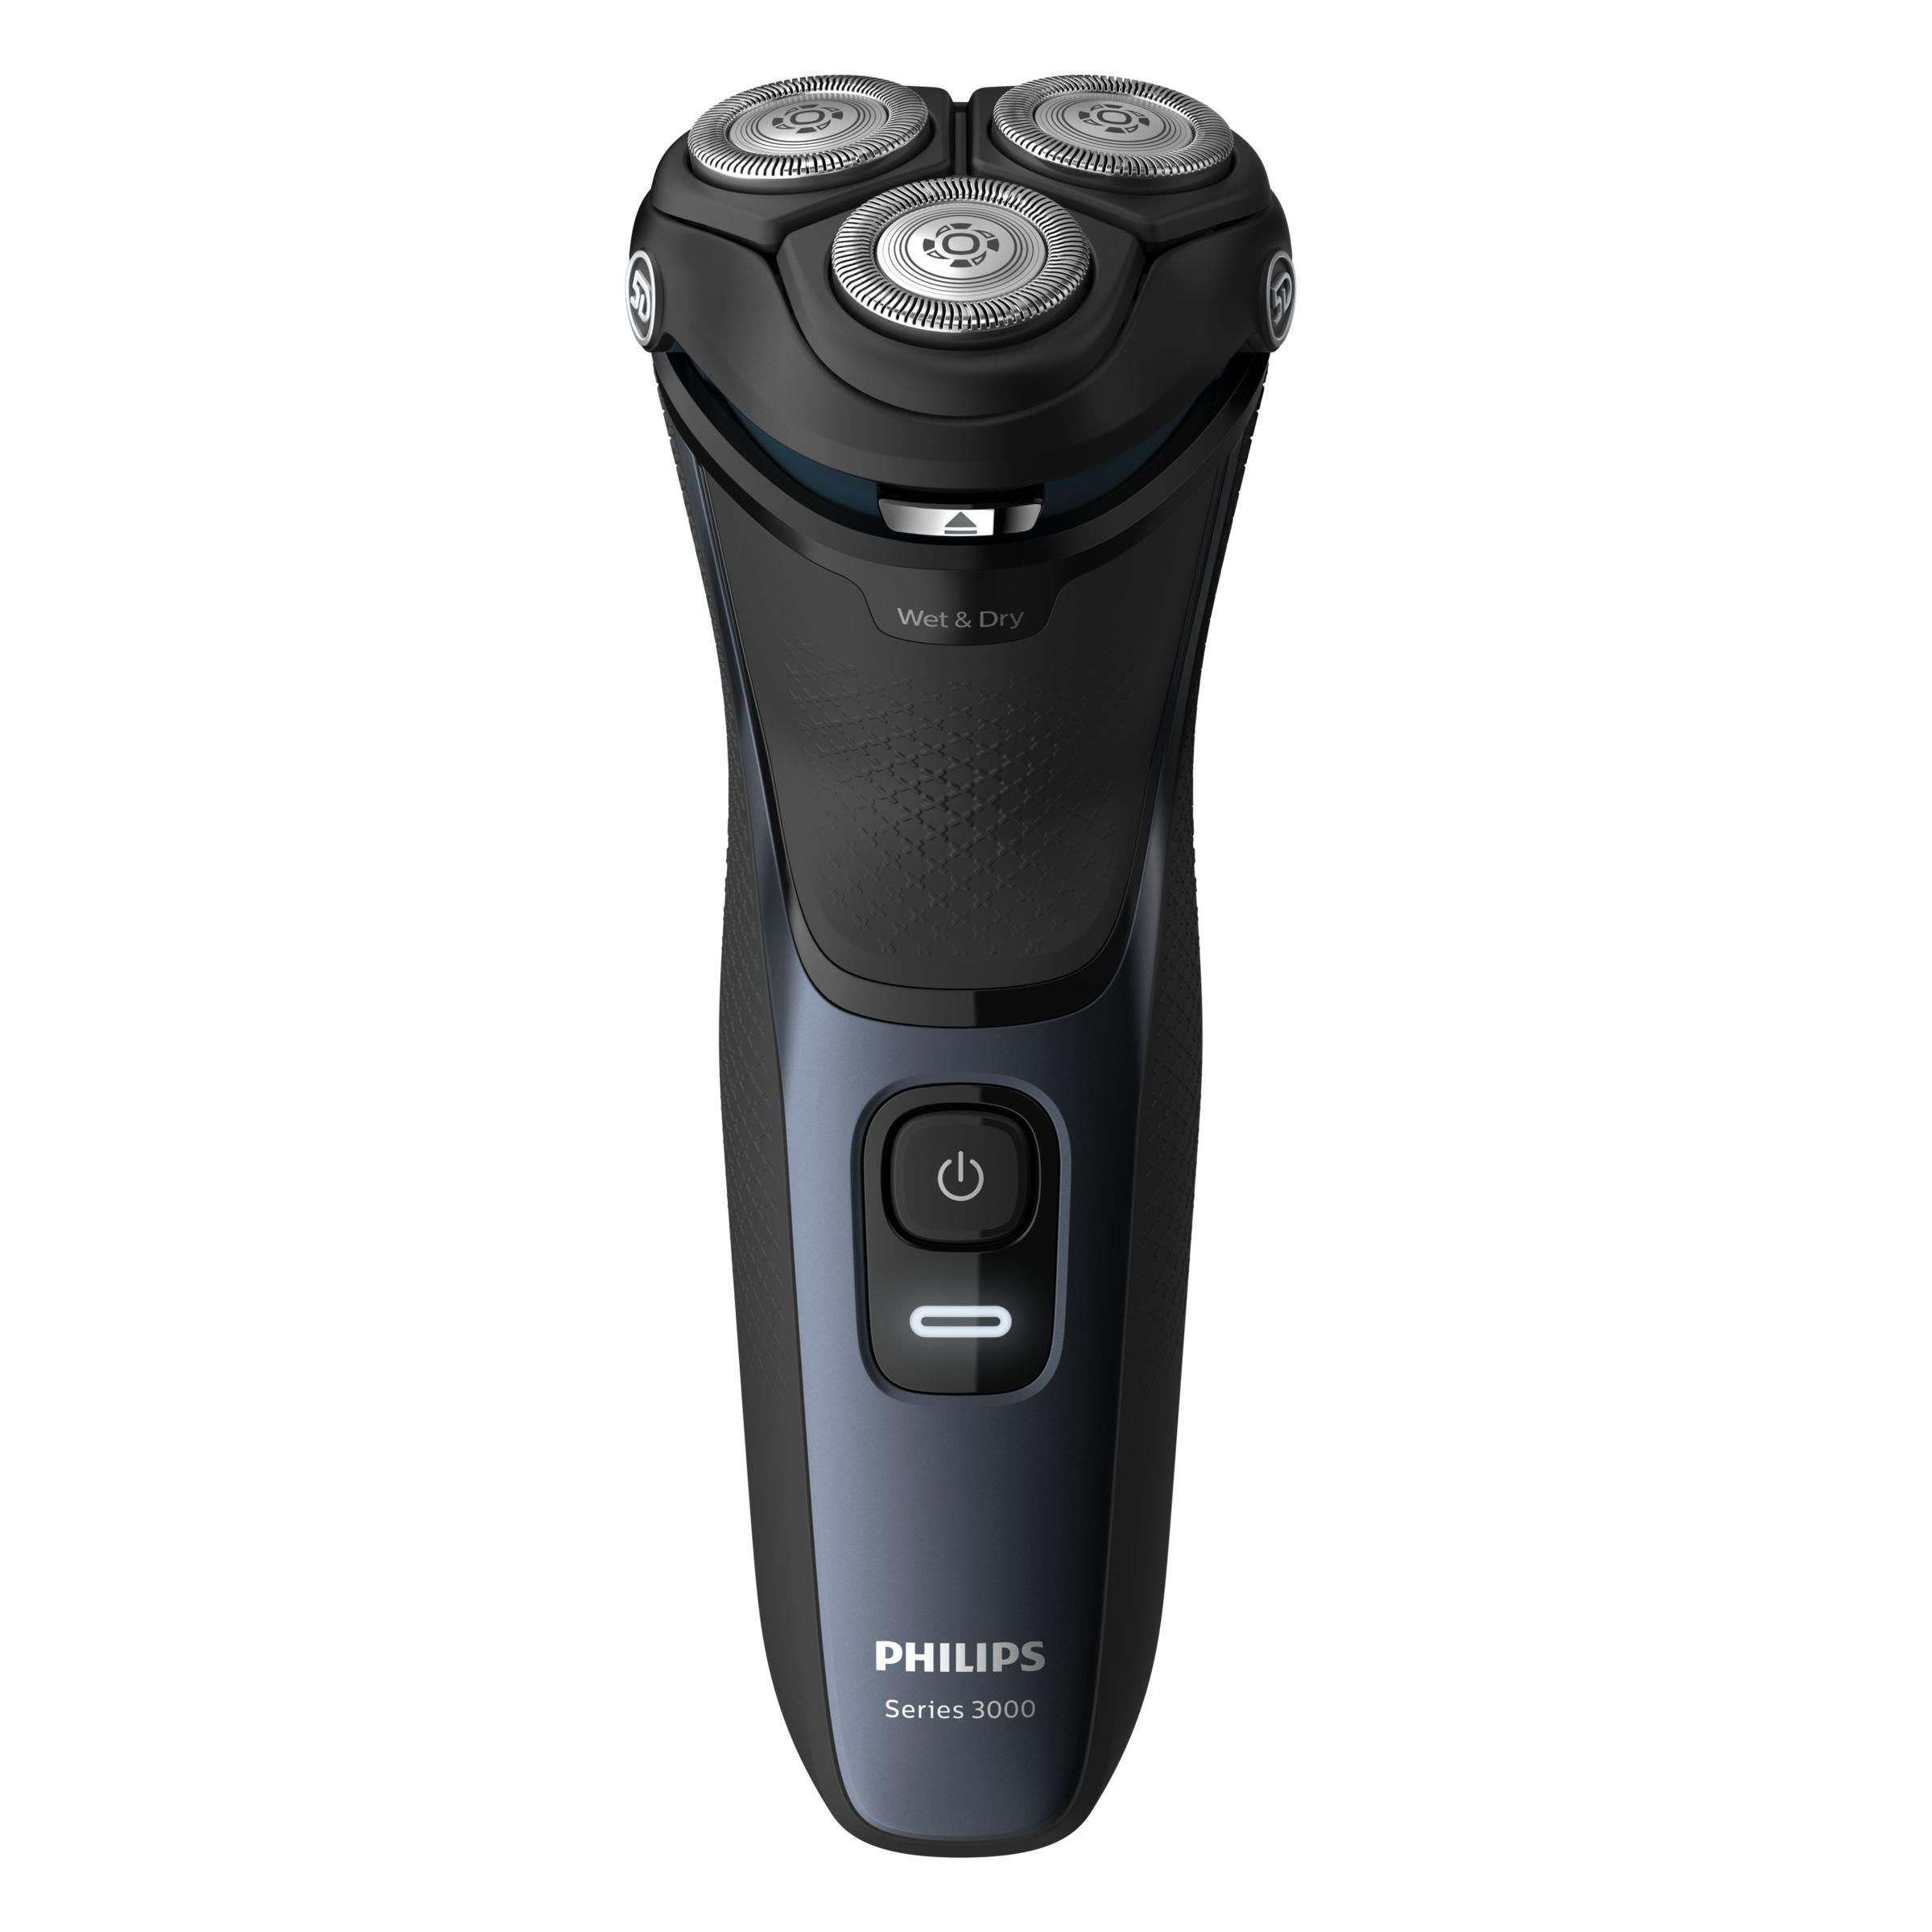 Philips S3134/51 Shaver Series